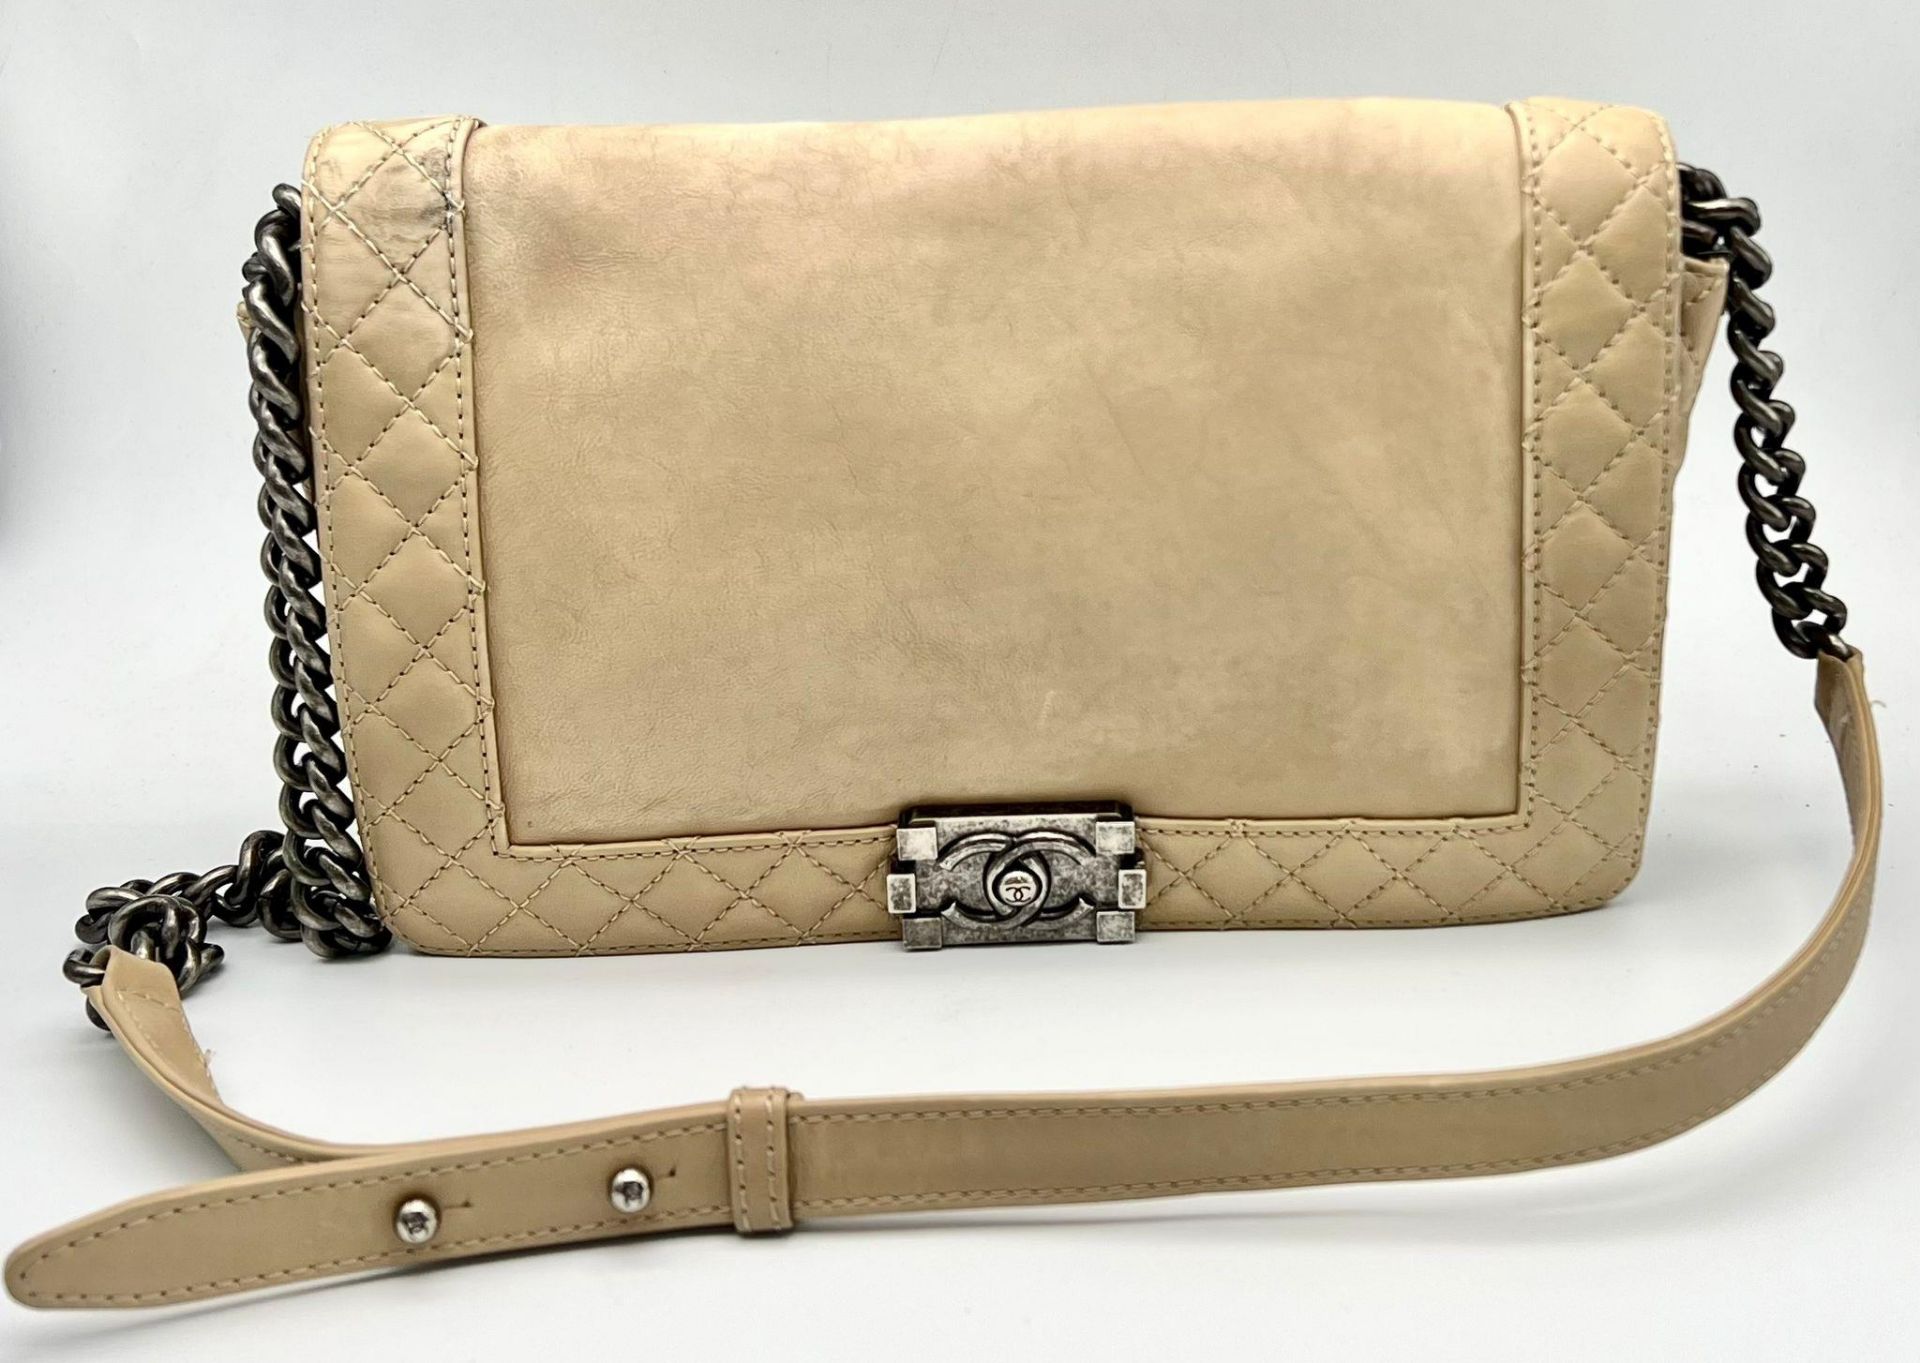 A Chanel Beige Leather Crossbody Flap Bag. Soft leather with gun-metal finish hardware. Textile